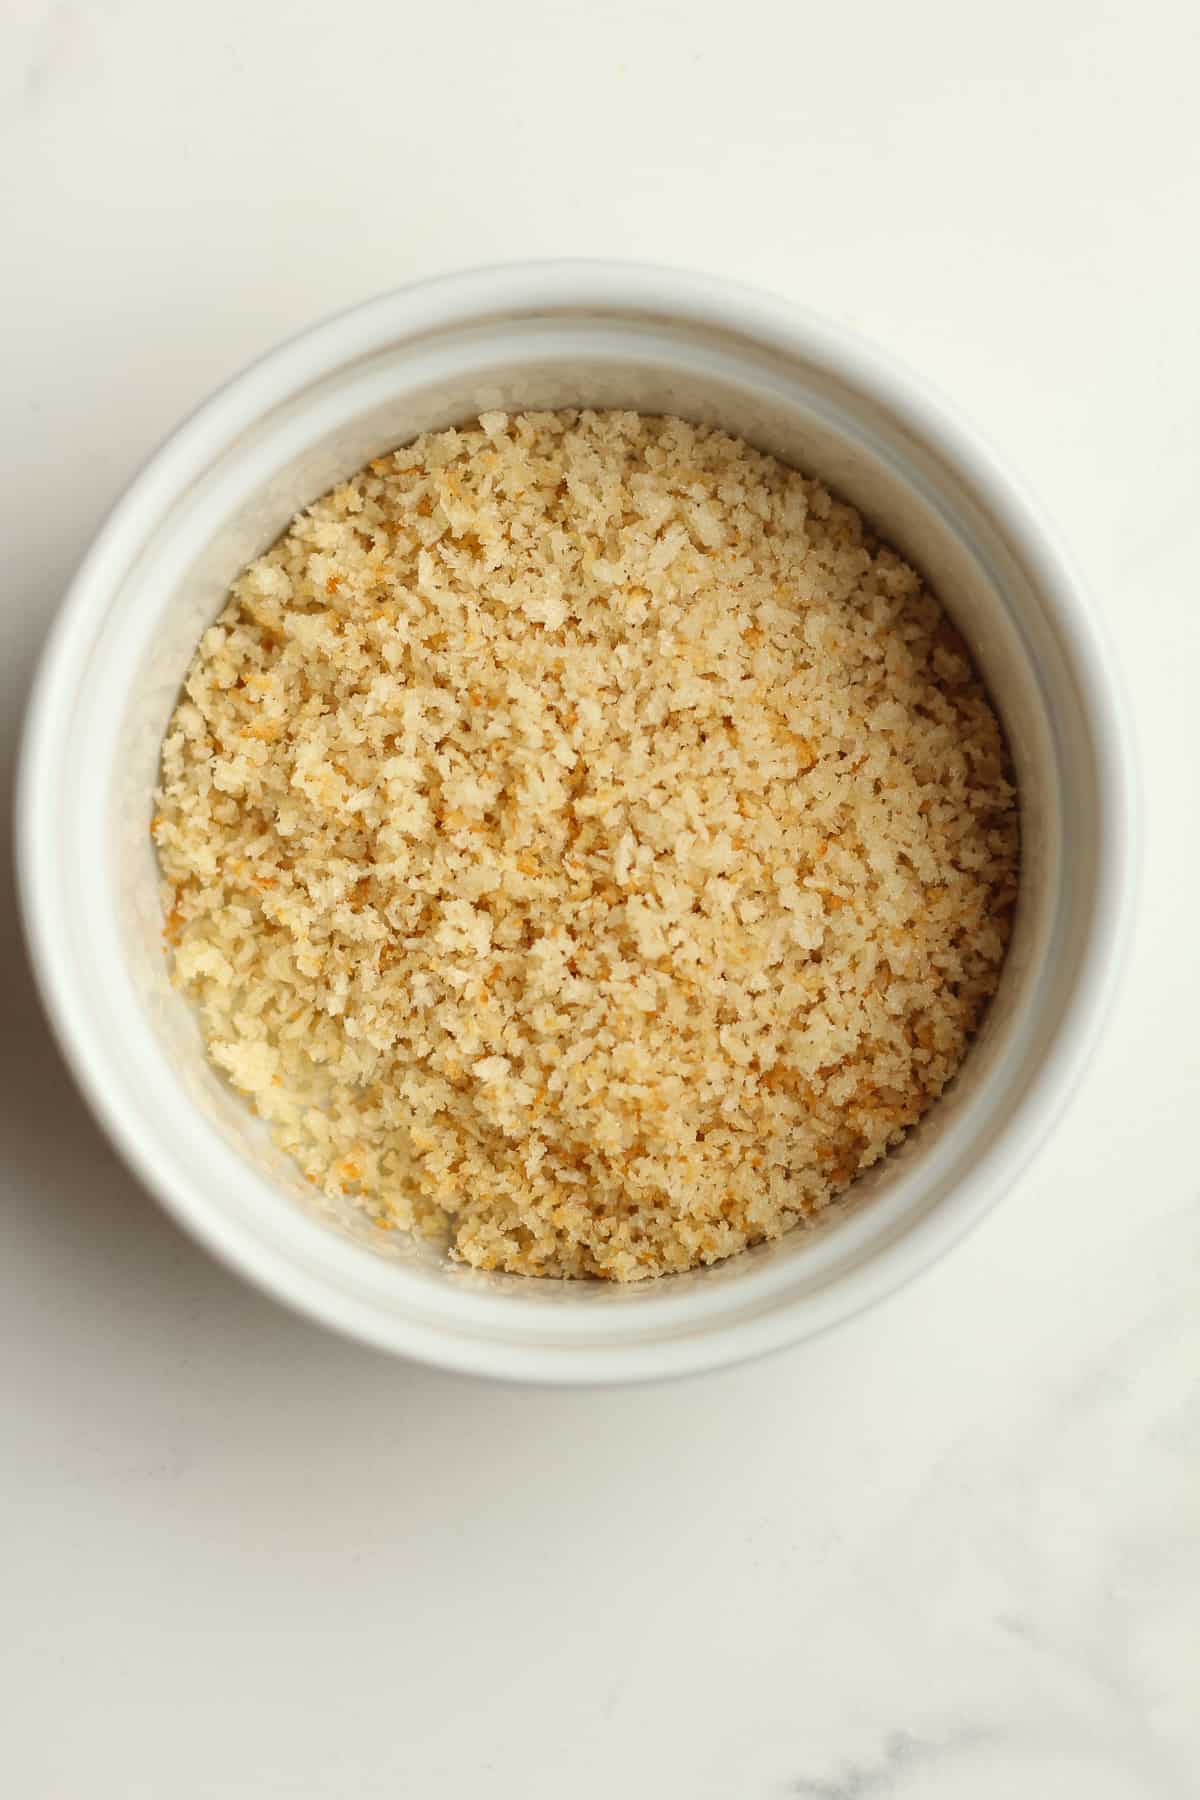 A bowl of toasted bread crumbs.